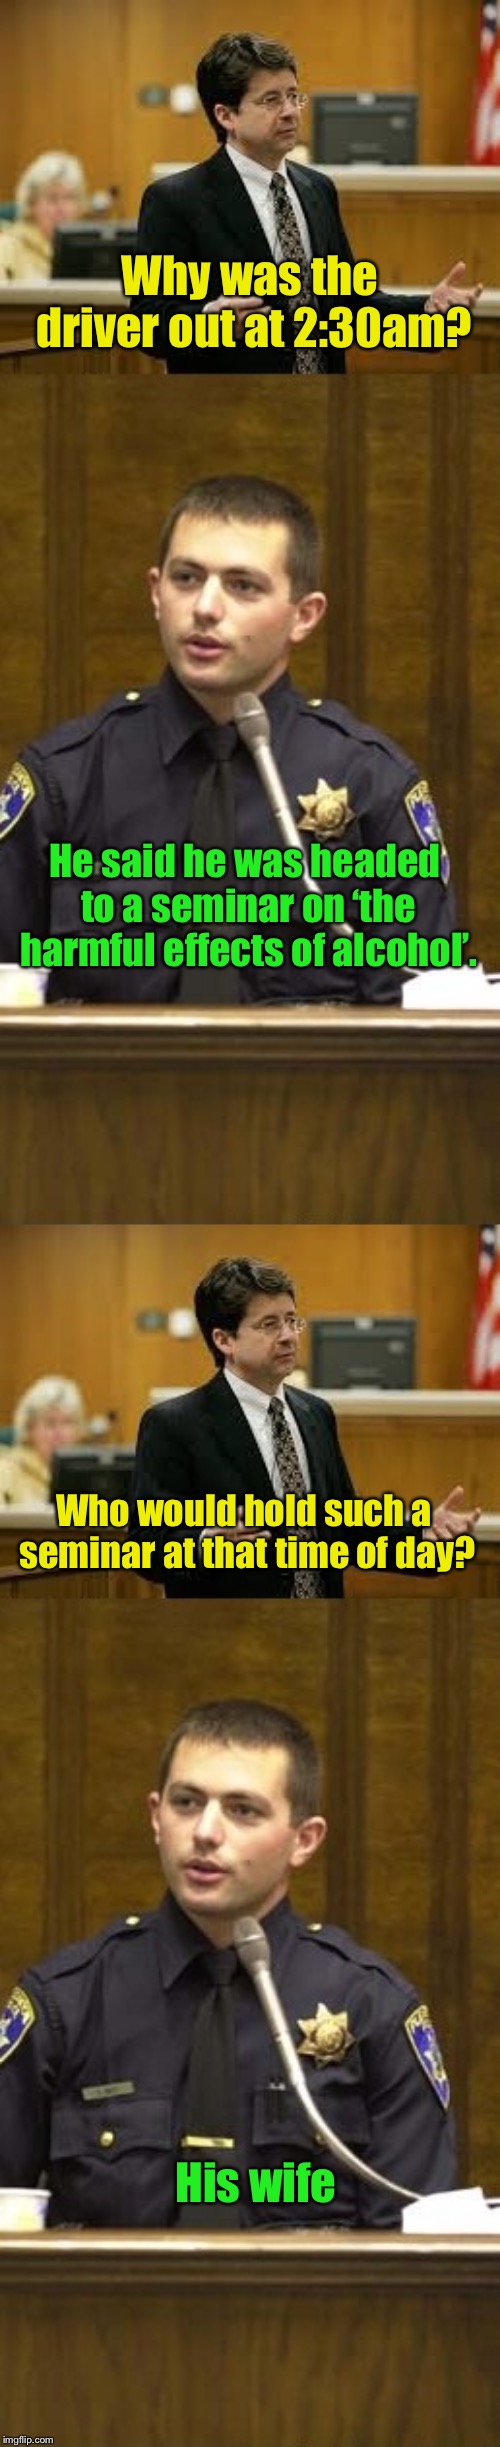 Lawyer and Cop testifying | Why was the driver out at 2:30am? He said he was headed to a seminar on ‘the harmful effects of alcohol’. Who would hold such a seminar at that time of day? His wife | image tagged in lawyer and cop testifying | made w/ Imgflip meme maker